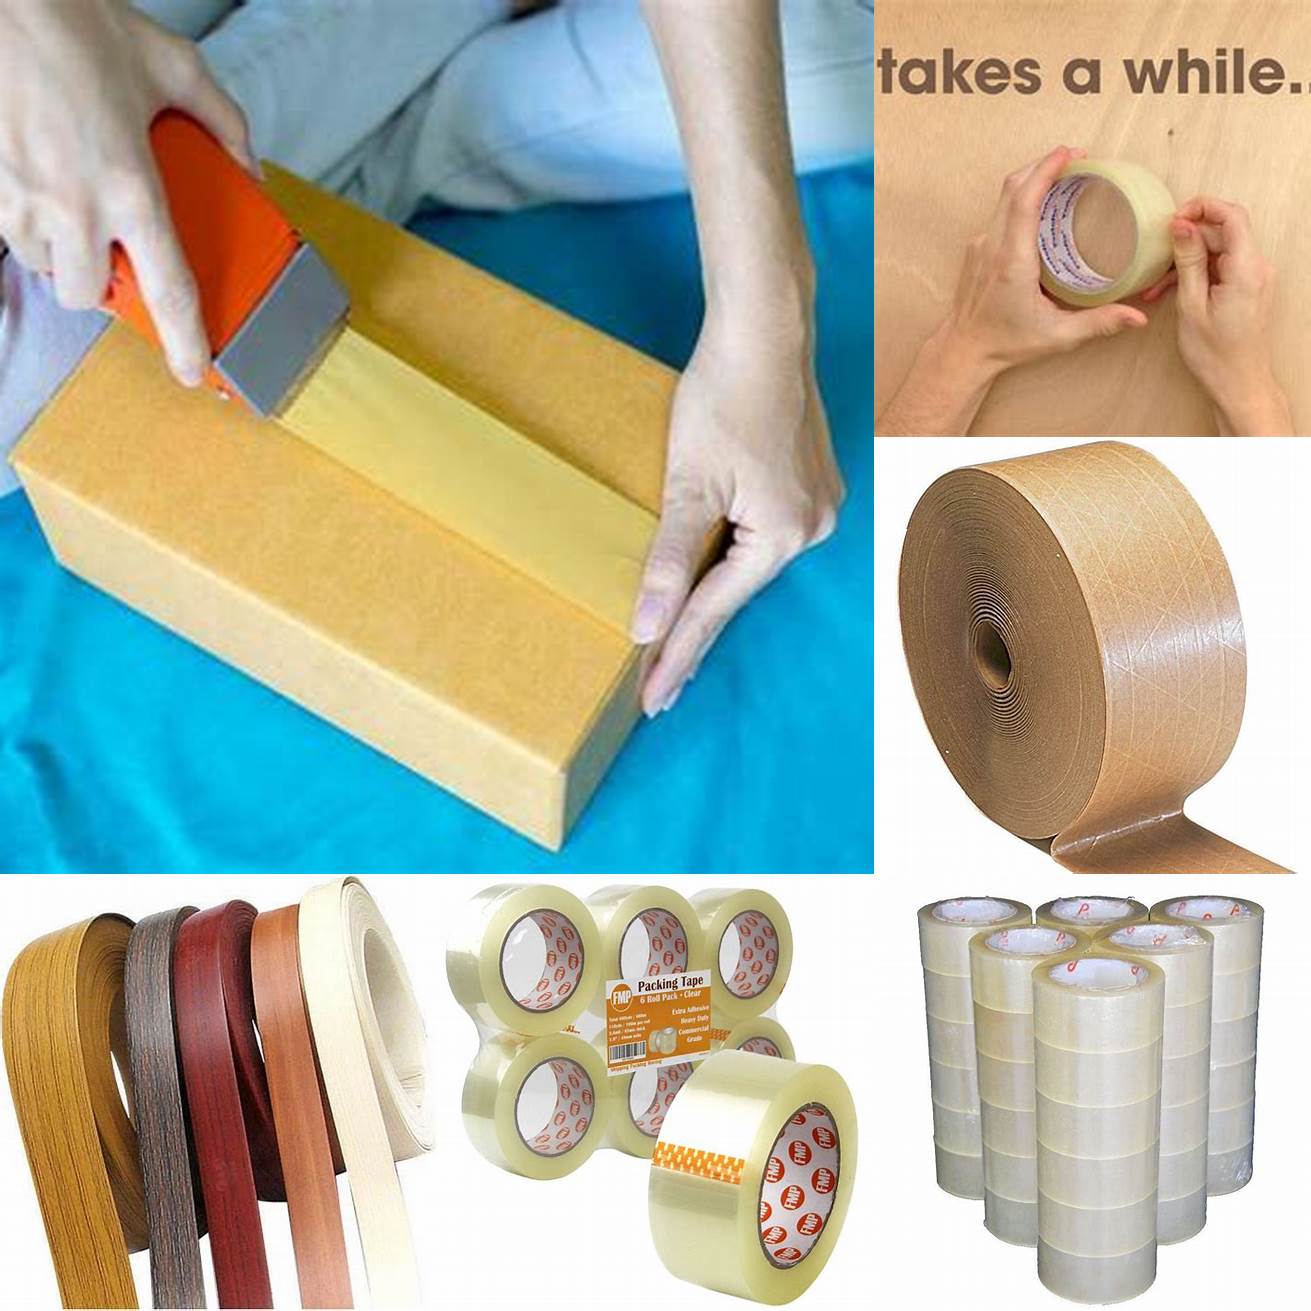 Taping the edges of the roll packaging